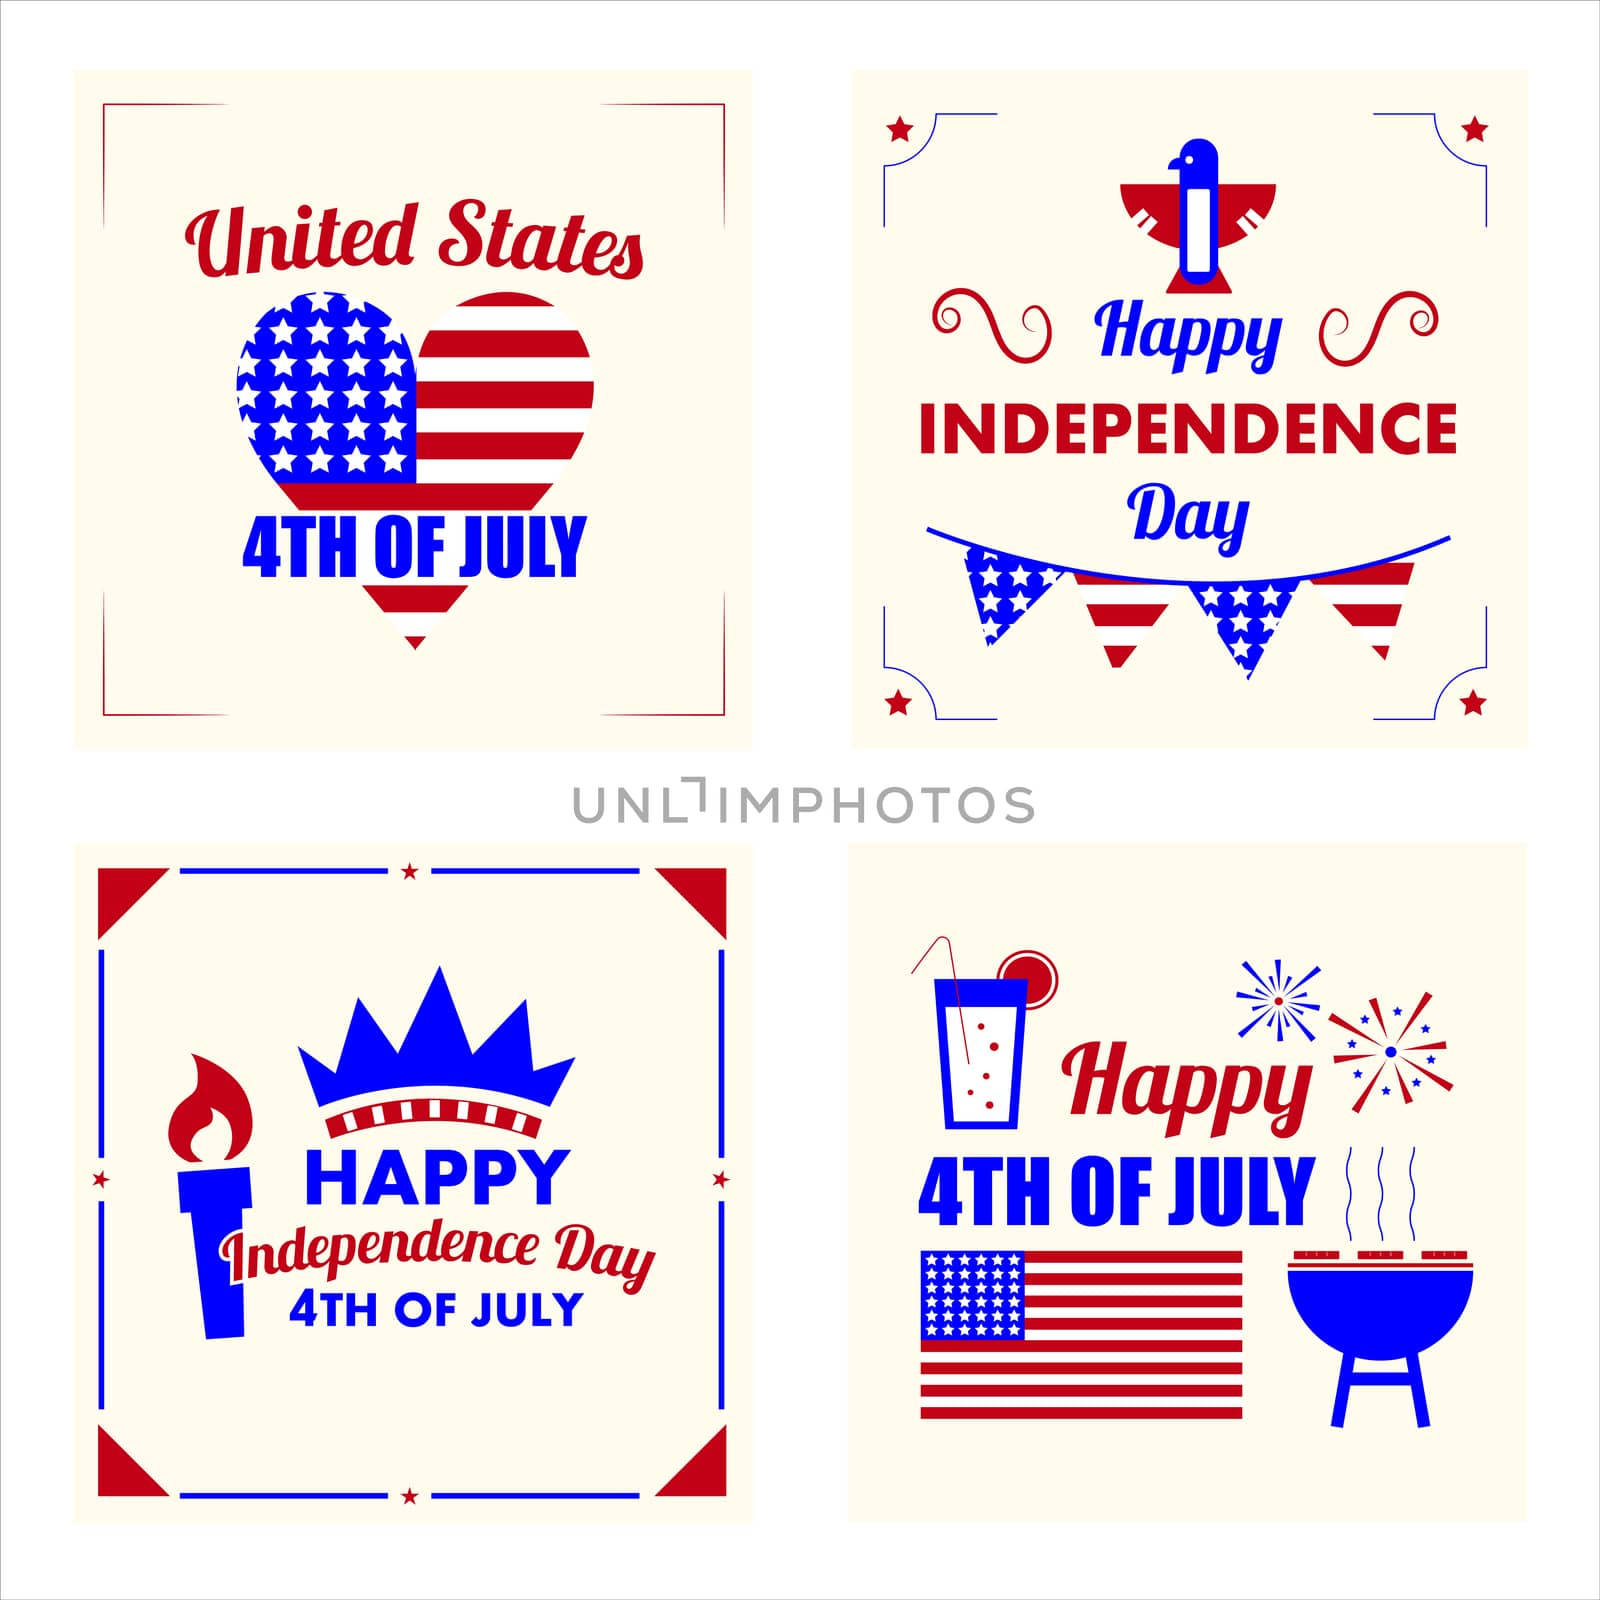 Card with happy independence day text by Wavebreakmedia